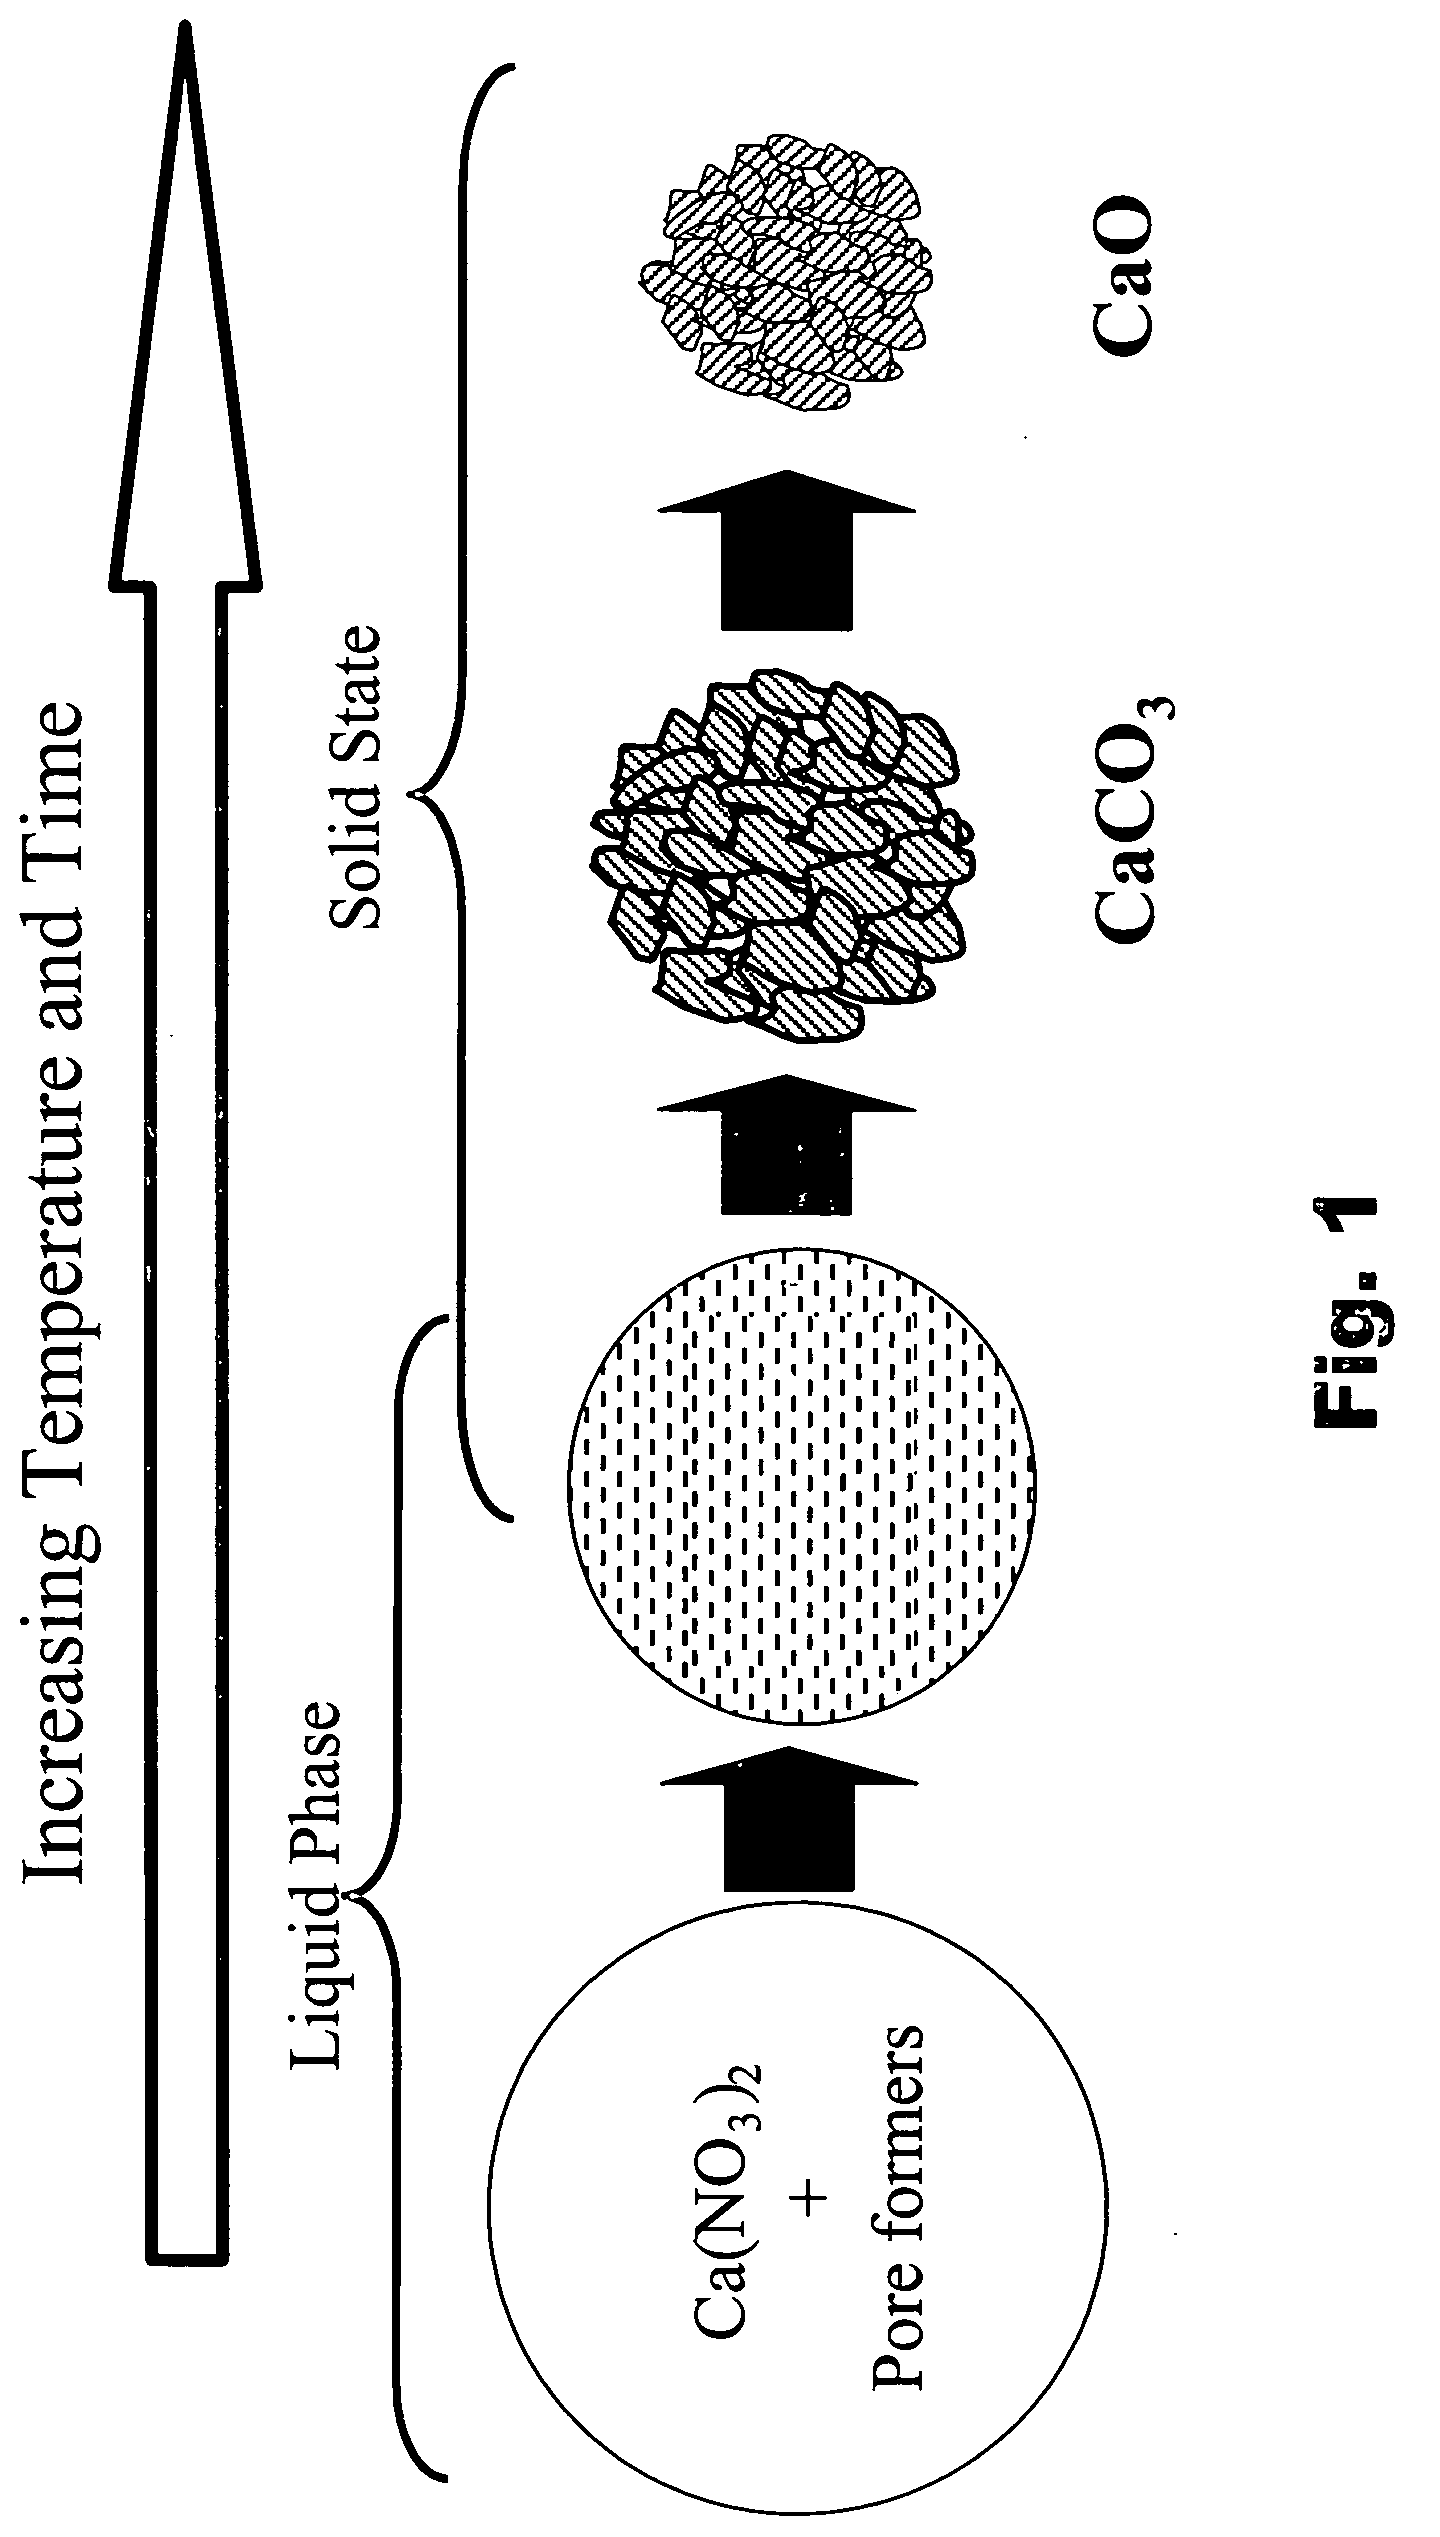 Fuel reformer catalyst and absorbent materials